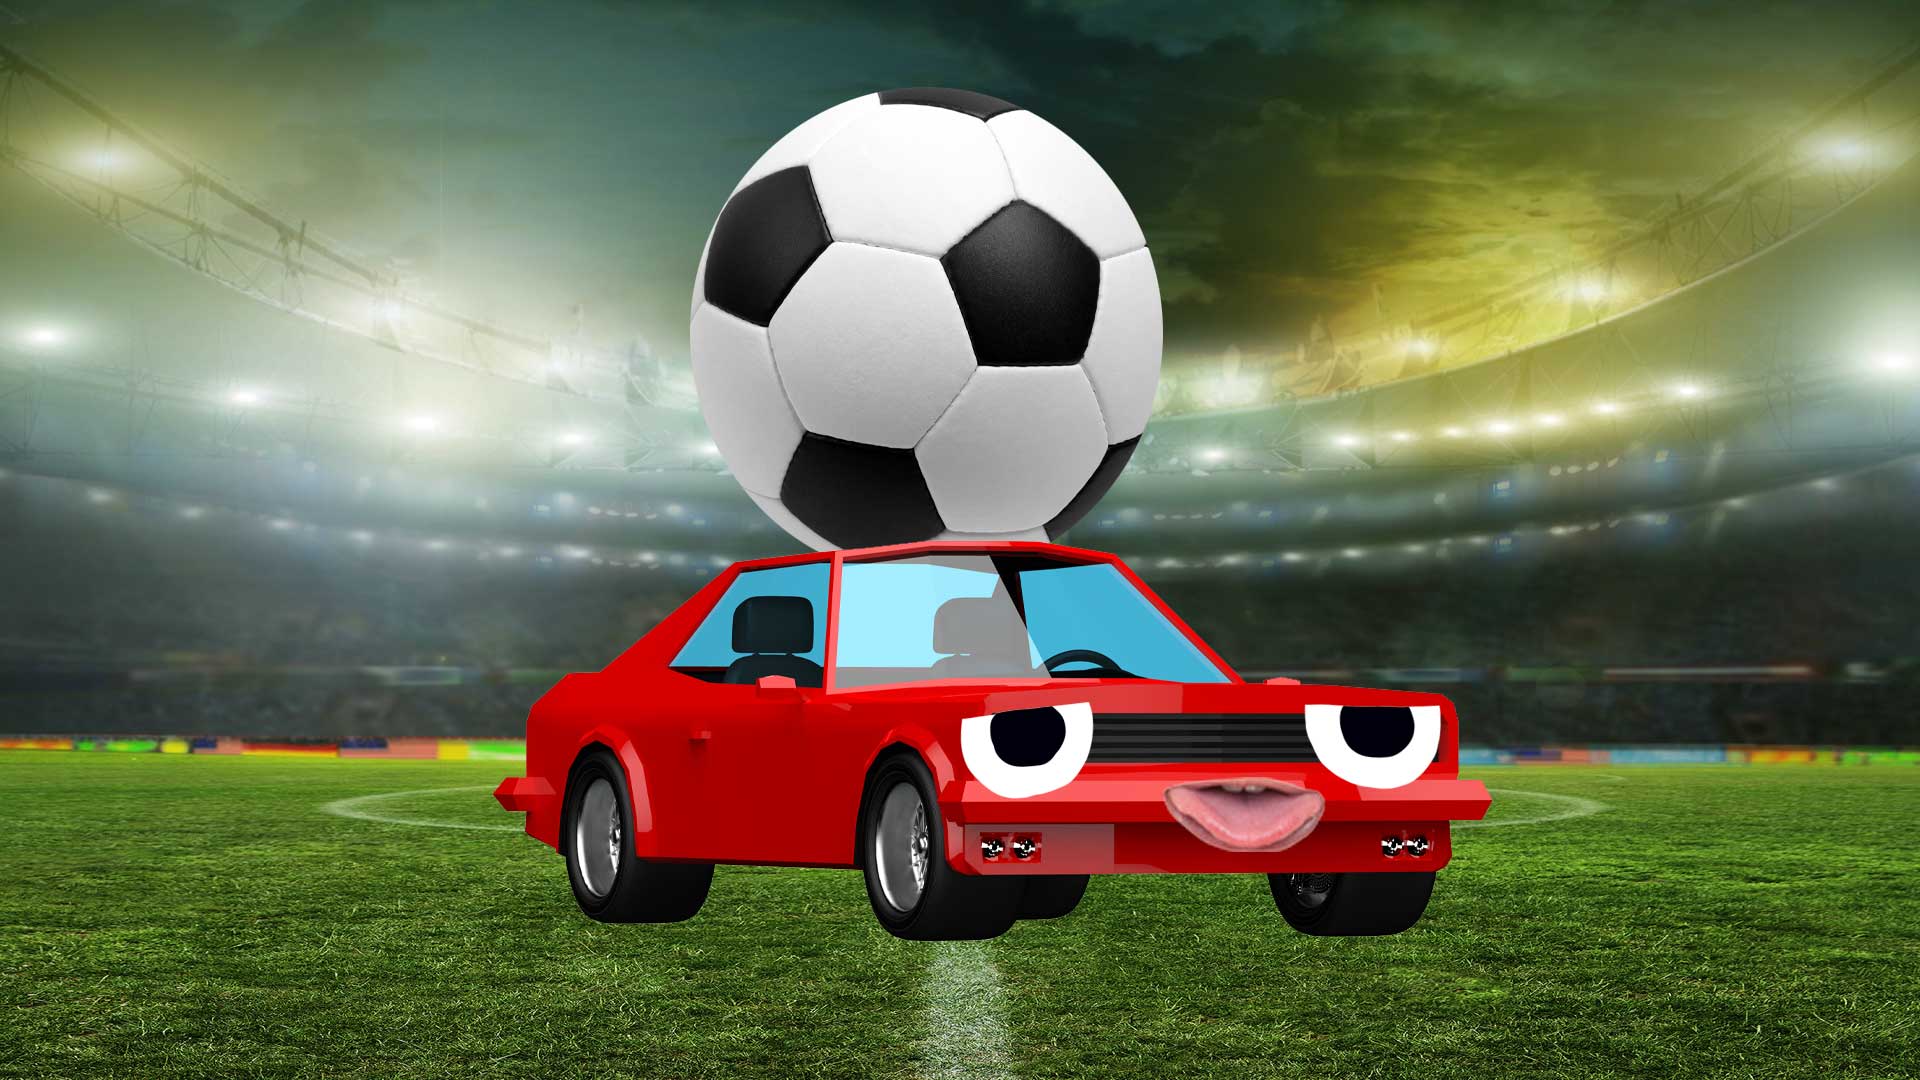 A small car carrying a football